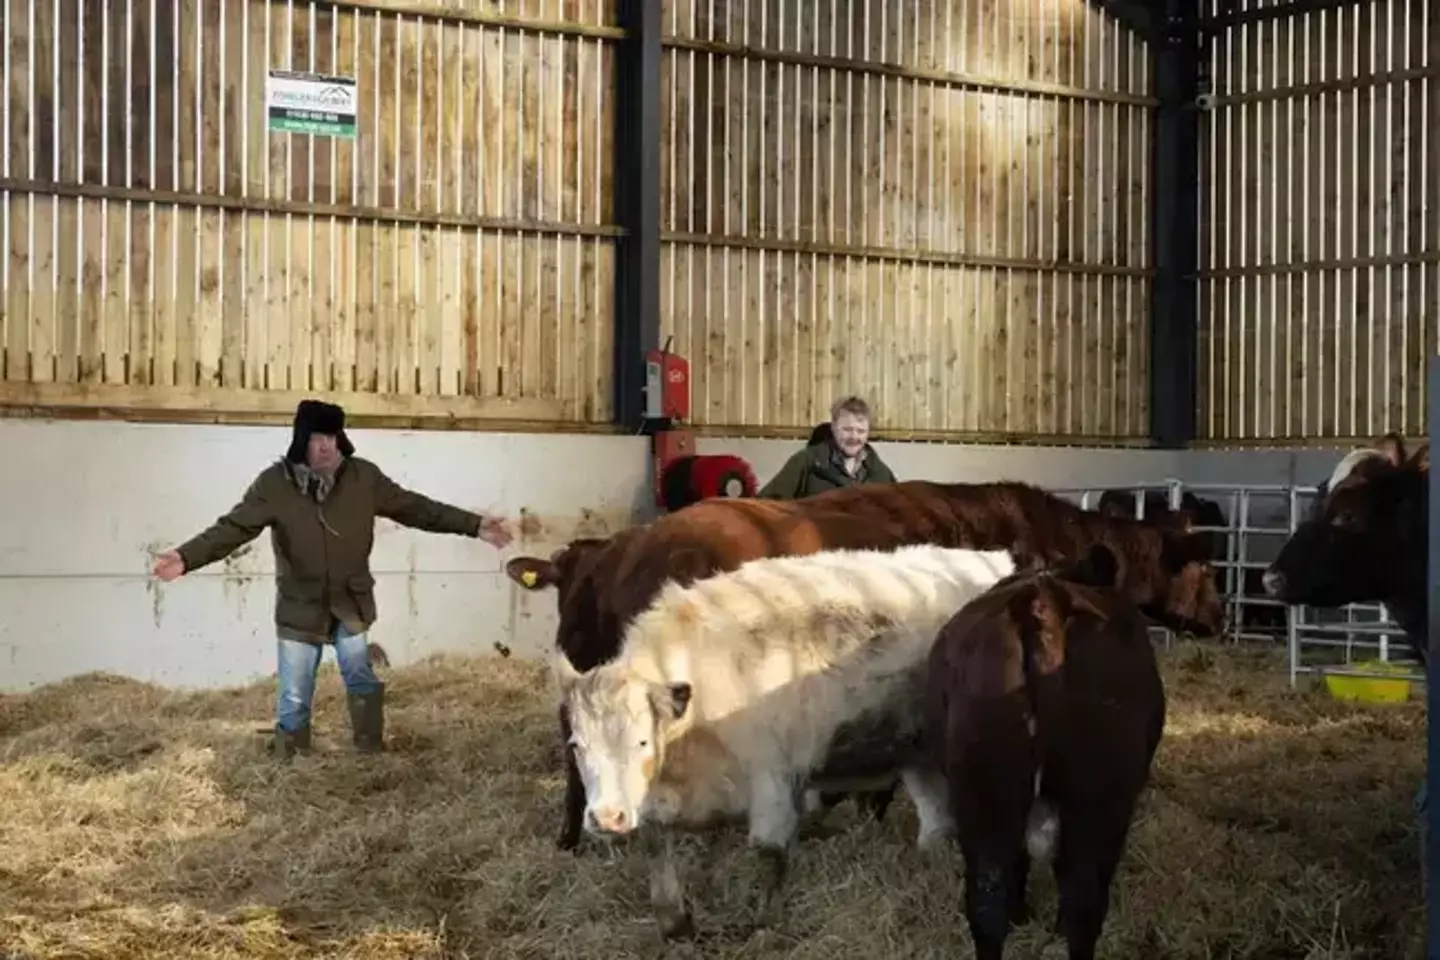 The latest season of Clarkson's show demonstrates the impact badgers are having on cattle.